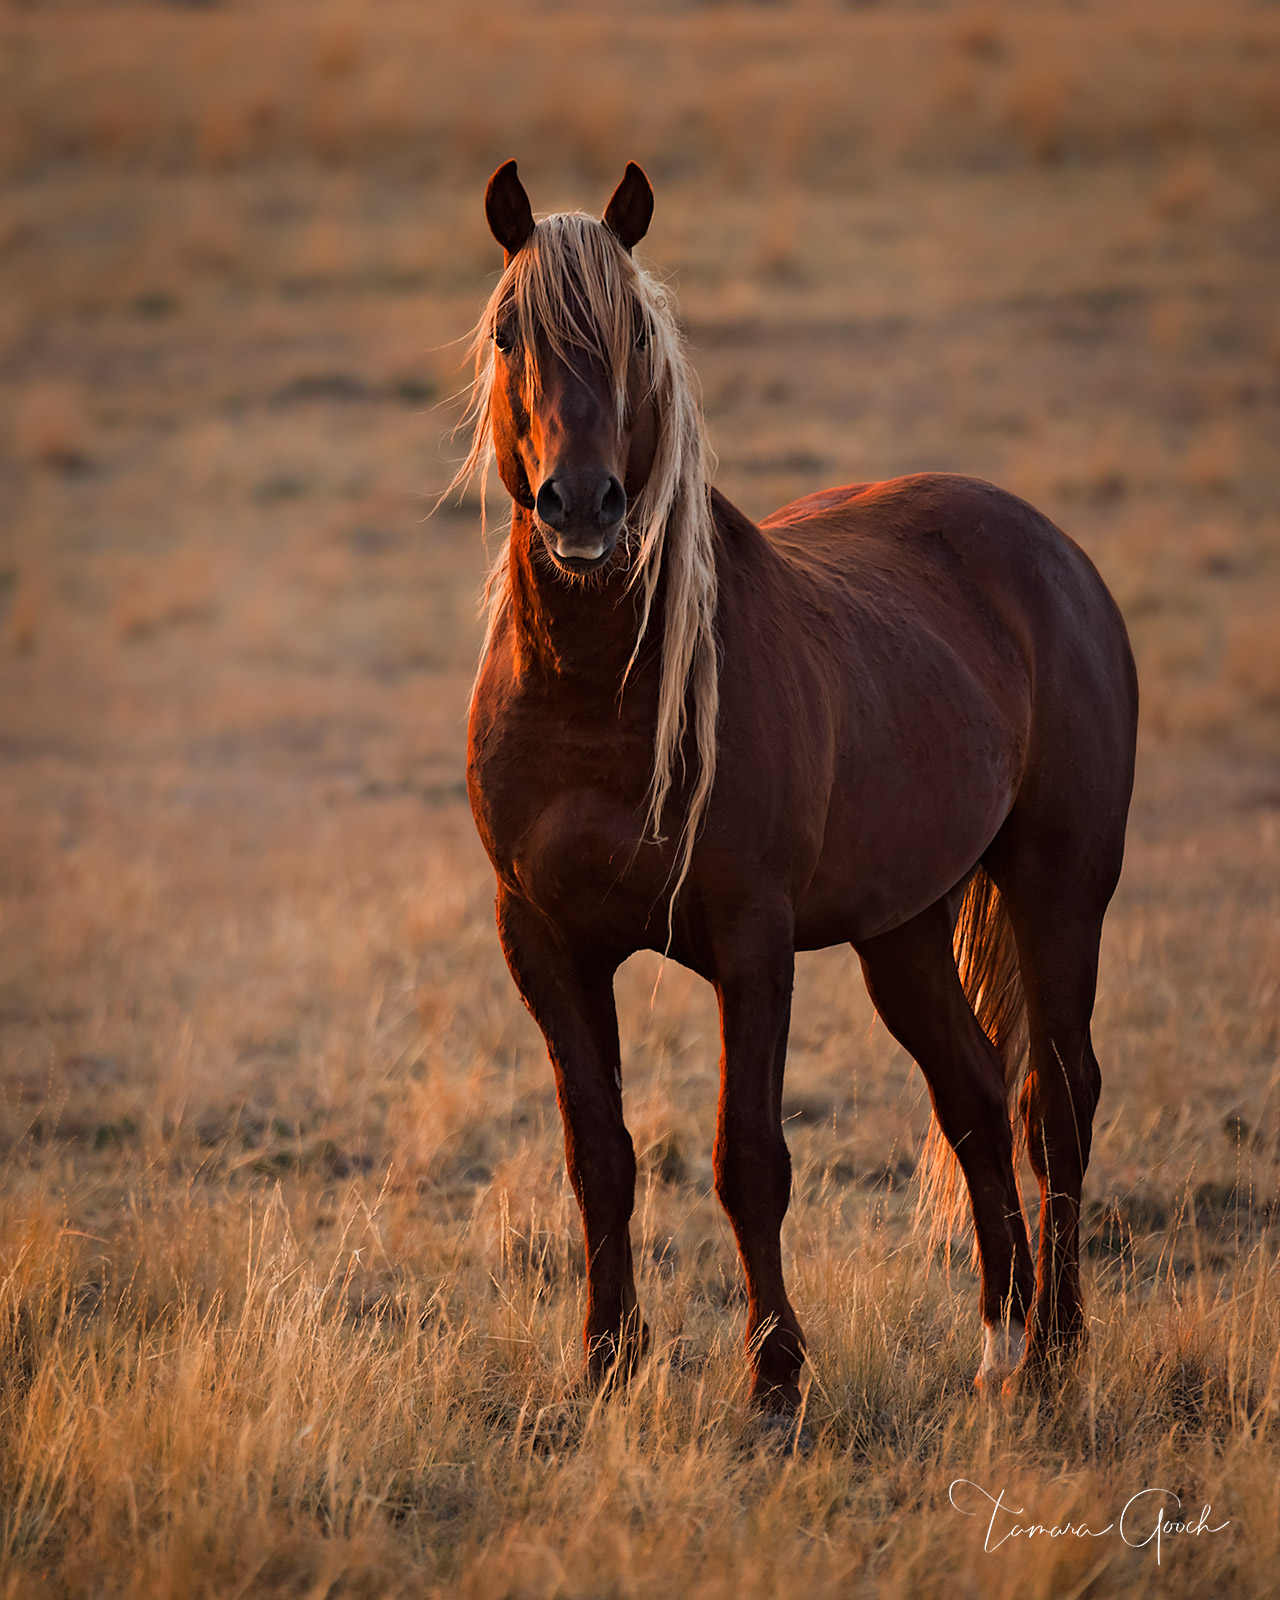 Wild Horse Photography print, high resolution wall art, gallery quality horse art.